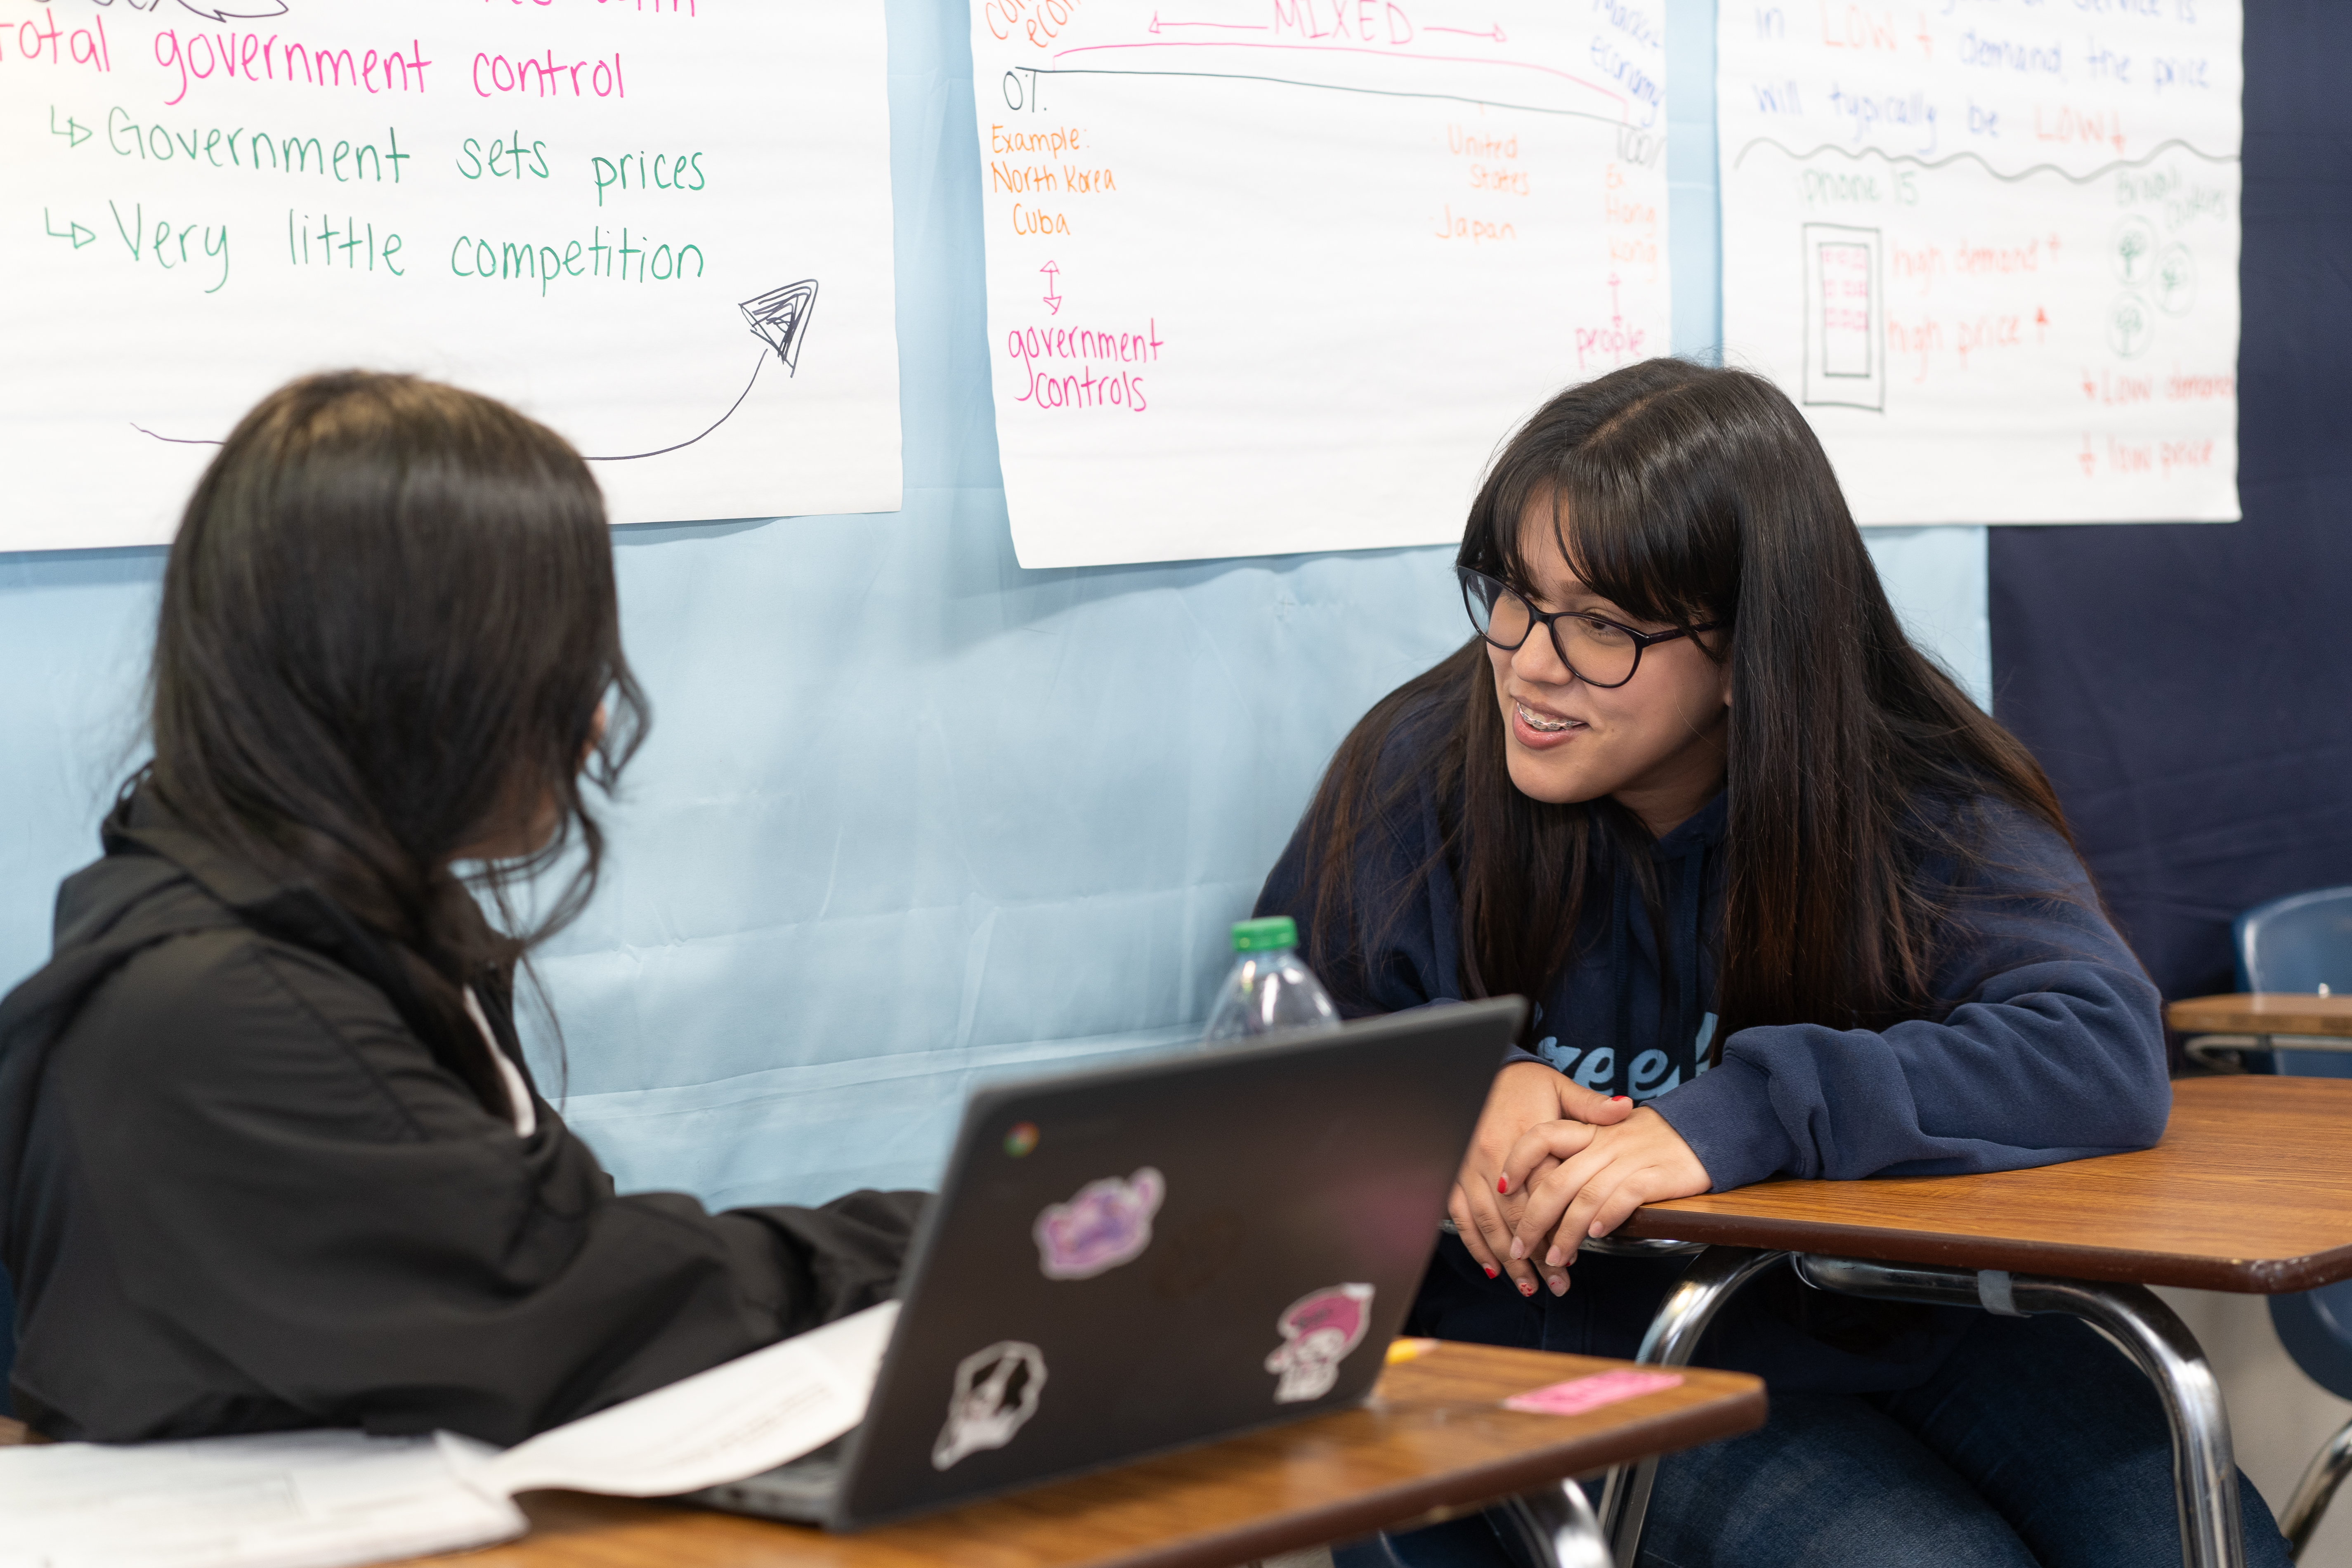 Skarlet Molina (right) chats with a classmate at Meadowcreek High School in Norcross, Georgia.